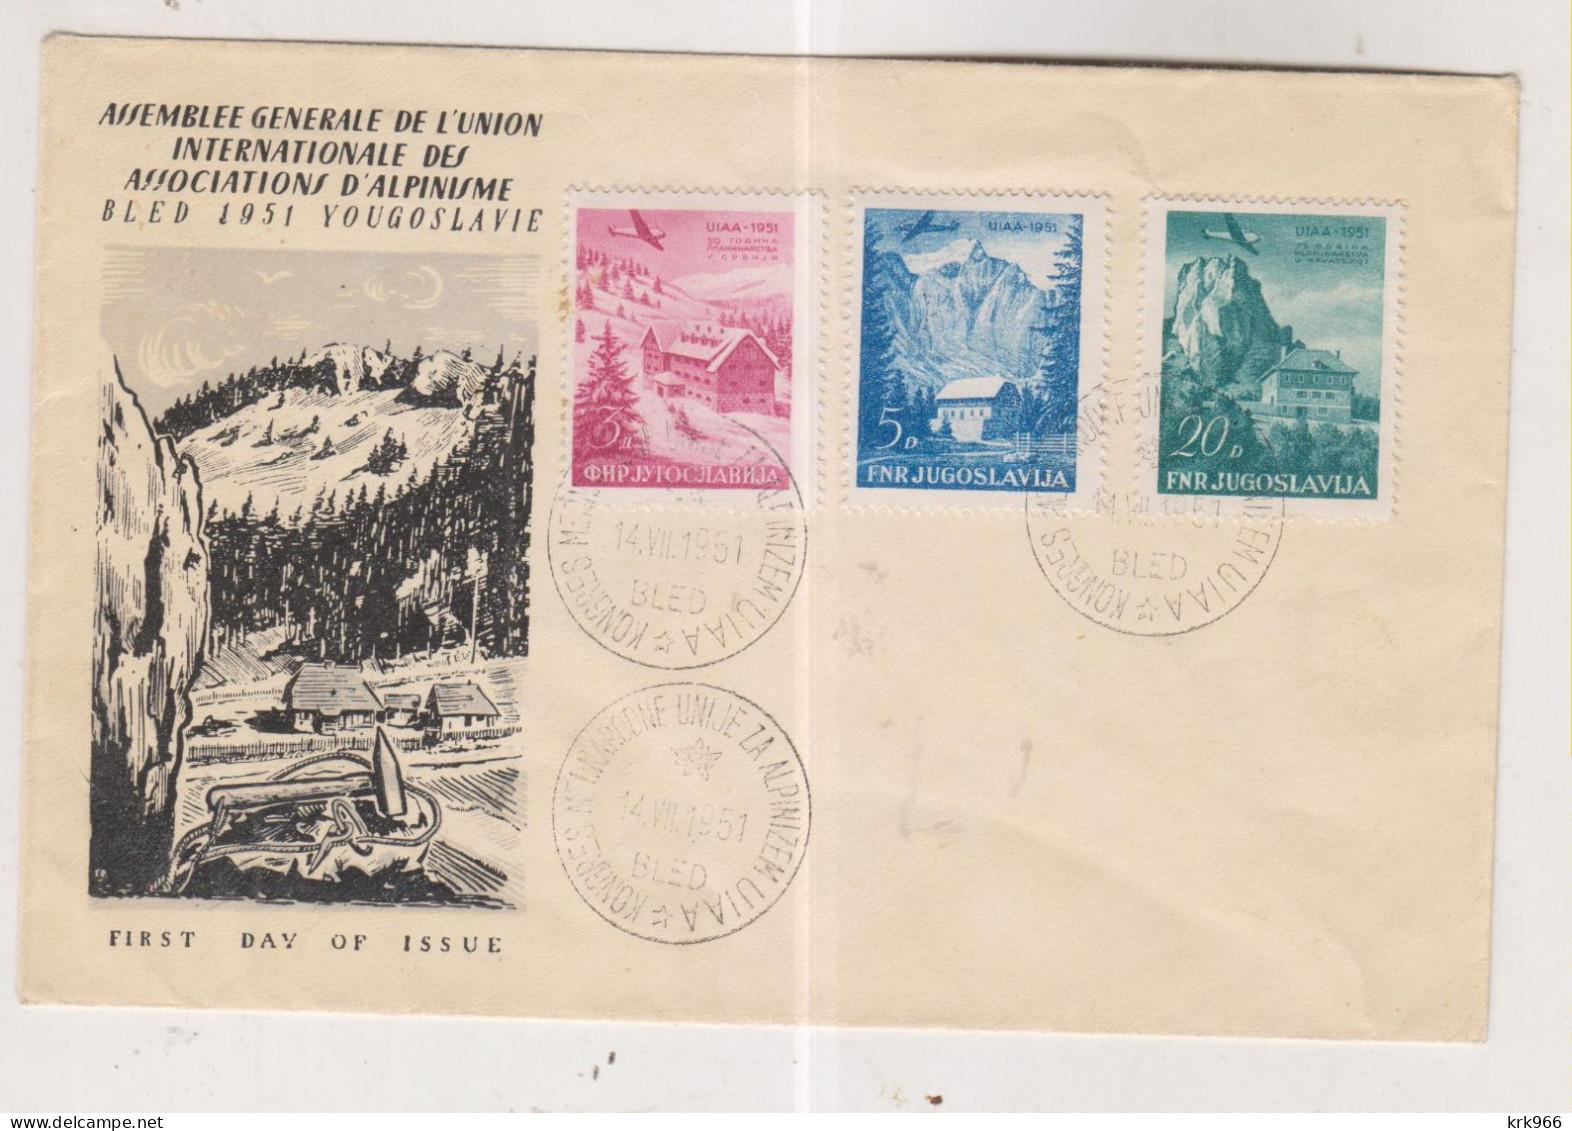 YUGOSLAVIA, 1951 Climbing BLED Nice Cover - Covers & Documents